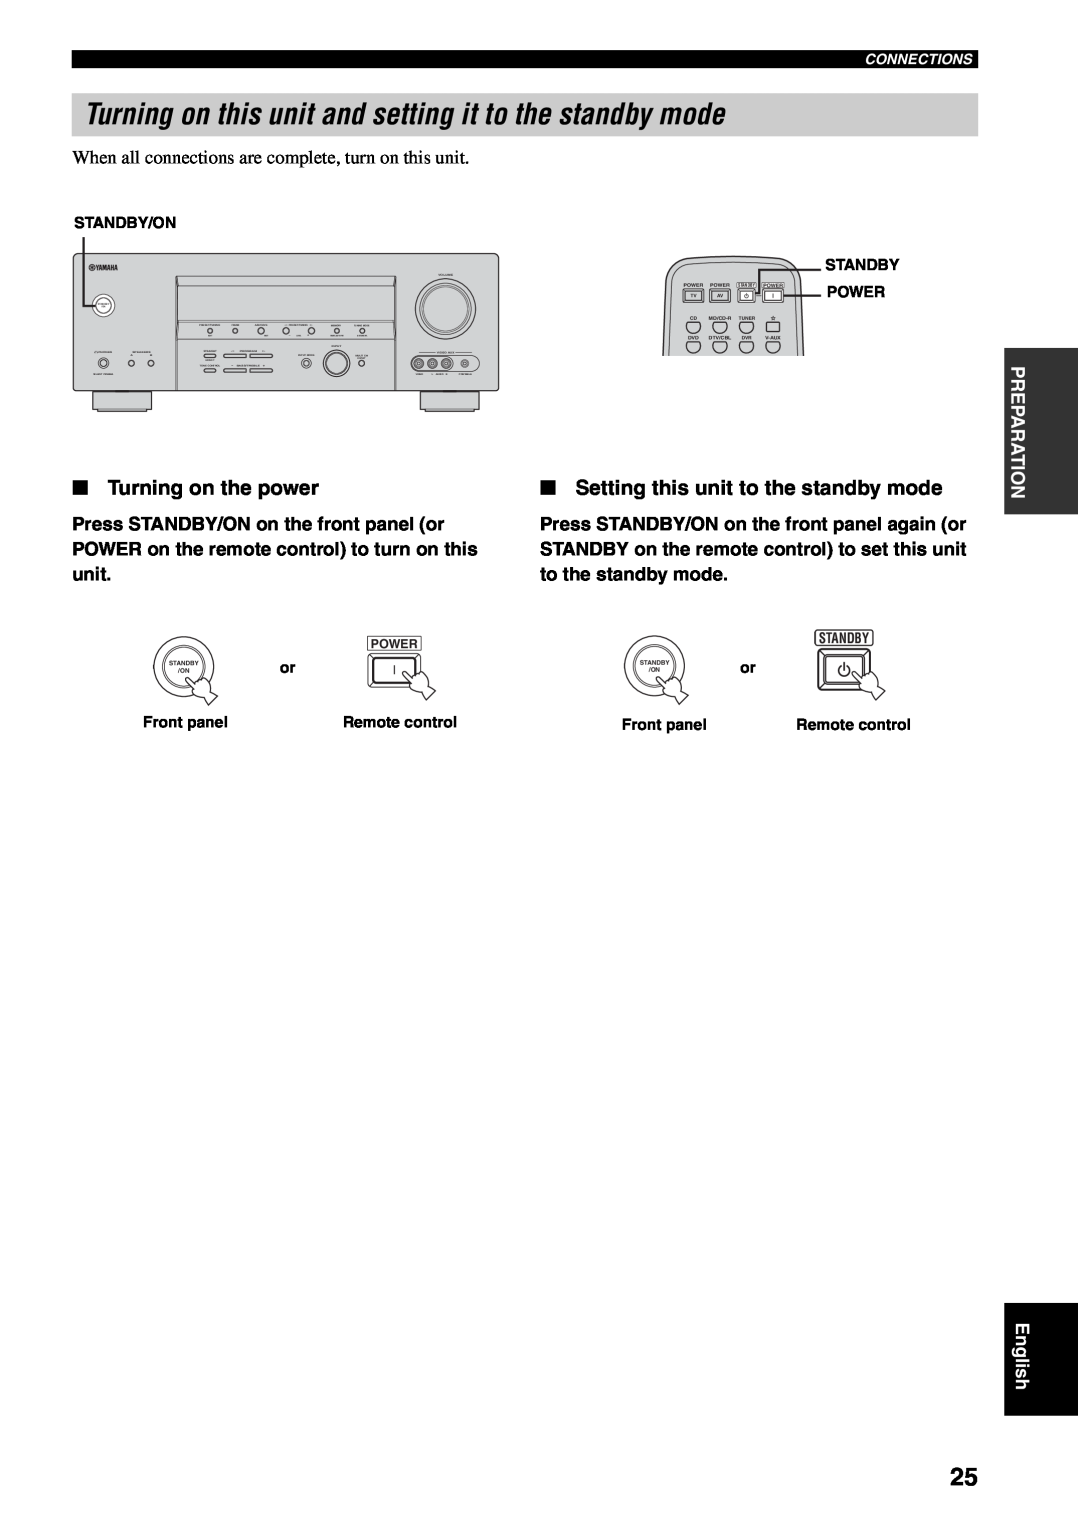 Yamaha RX-V459 owner manual Turning on the power, Setting this unit to the standby mode, Connections, Preparation, Power 